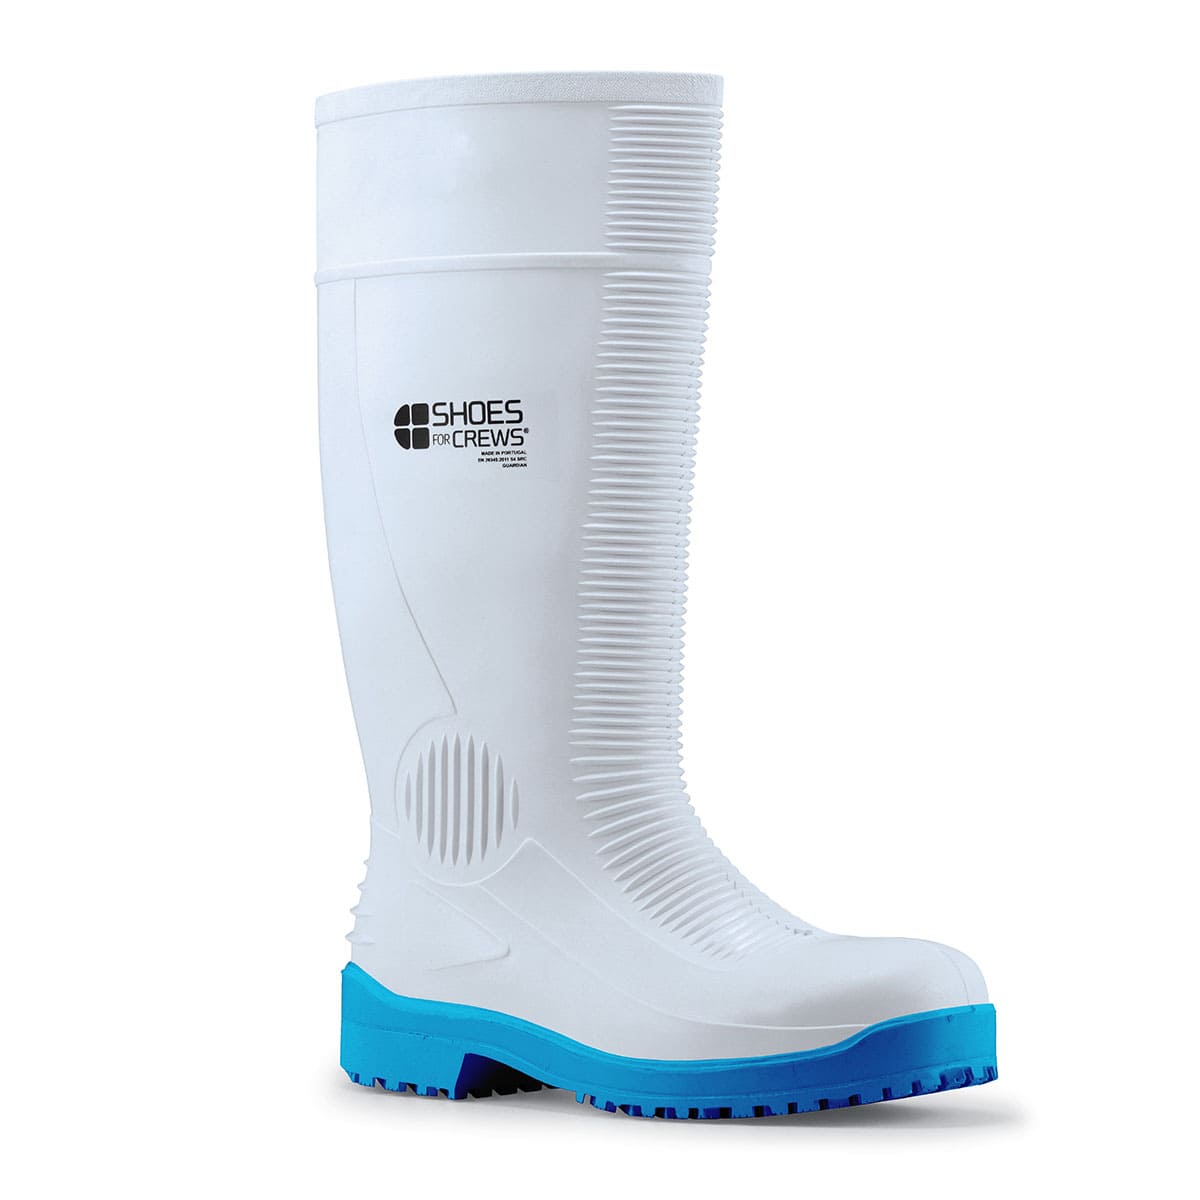 The Guardian S4 from Shoes For Crews are waterproof Wellington boots that offer superior slip resistance on a variety of pavement surfaces, seen from the right profile.